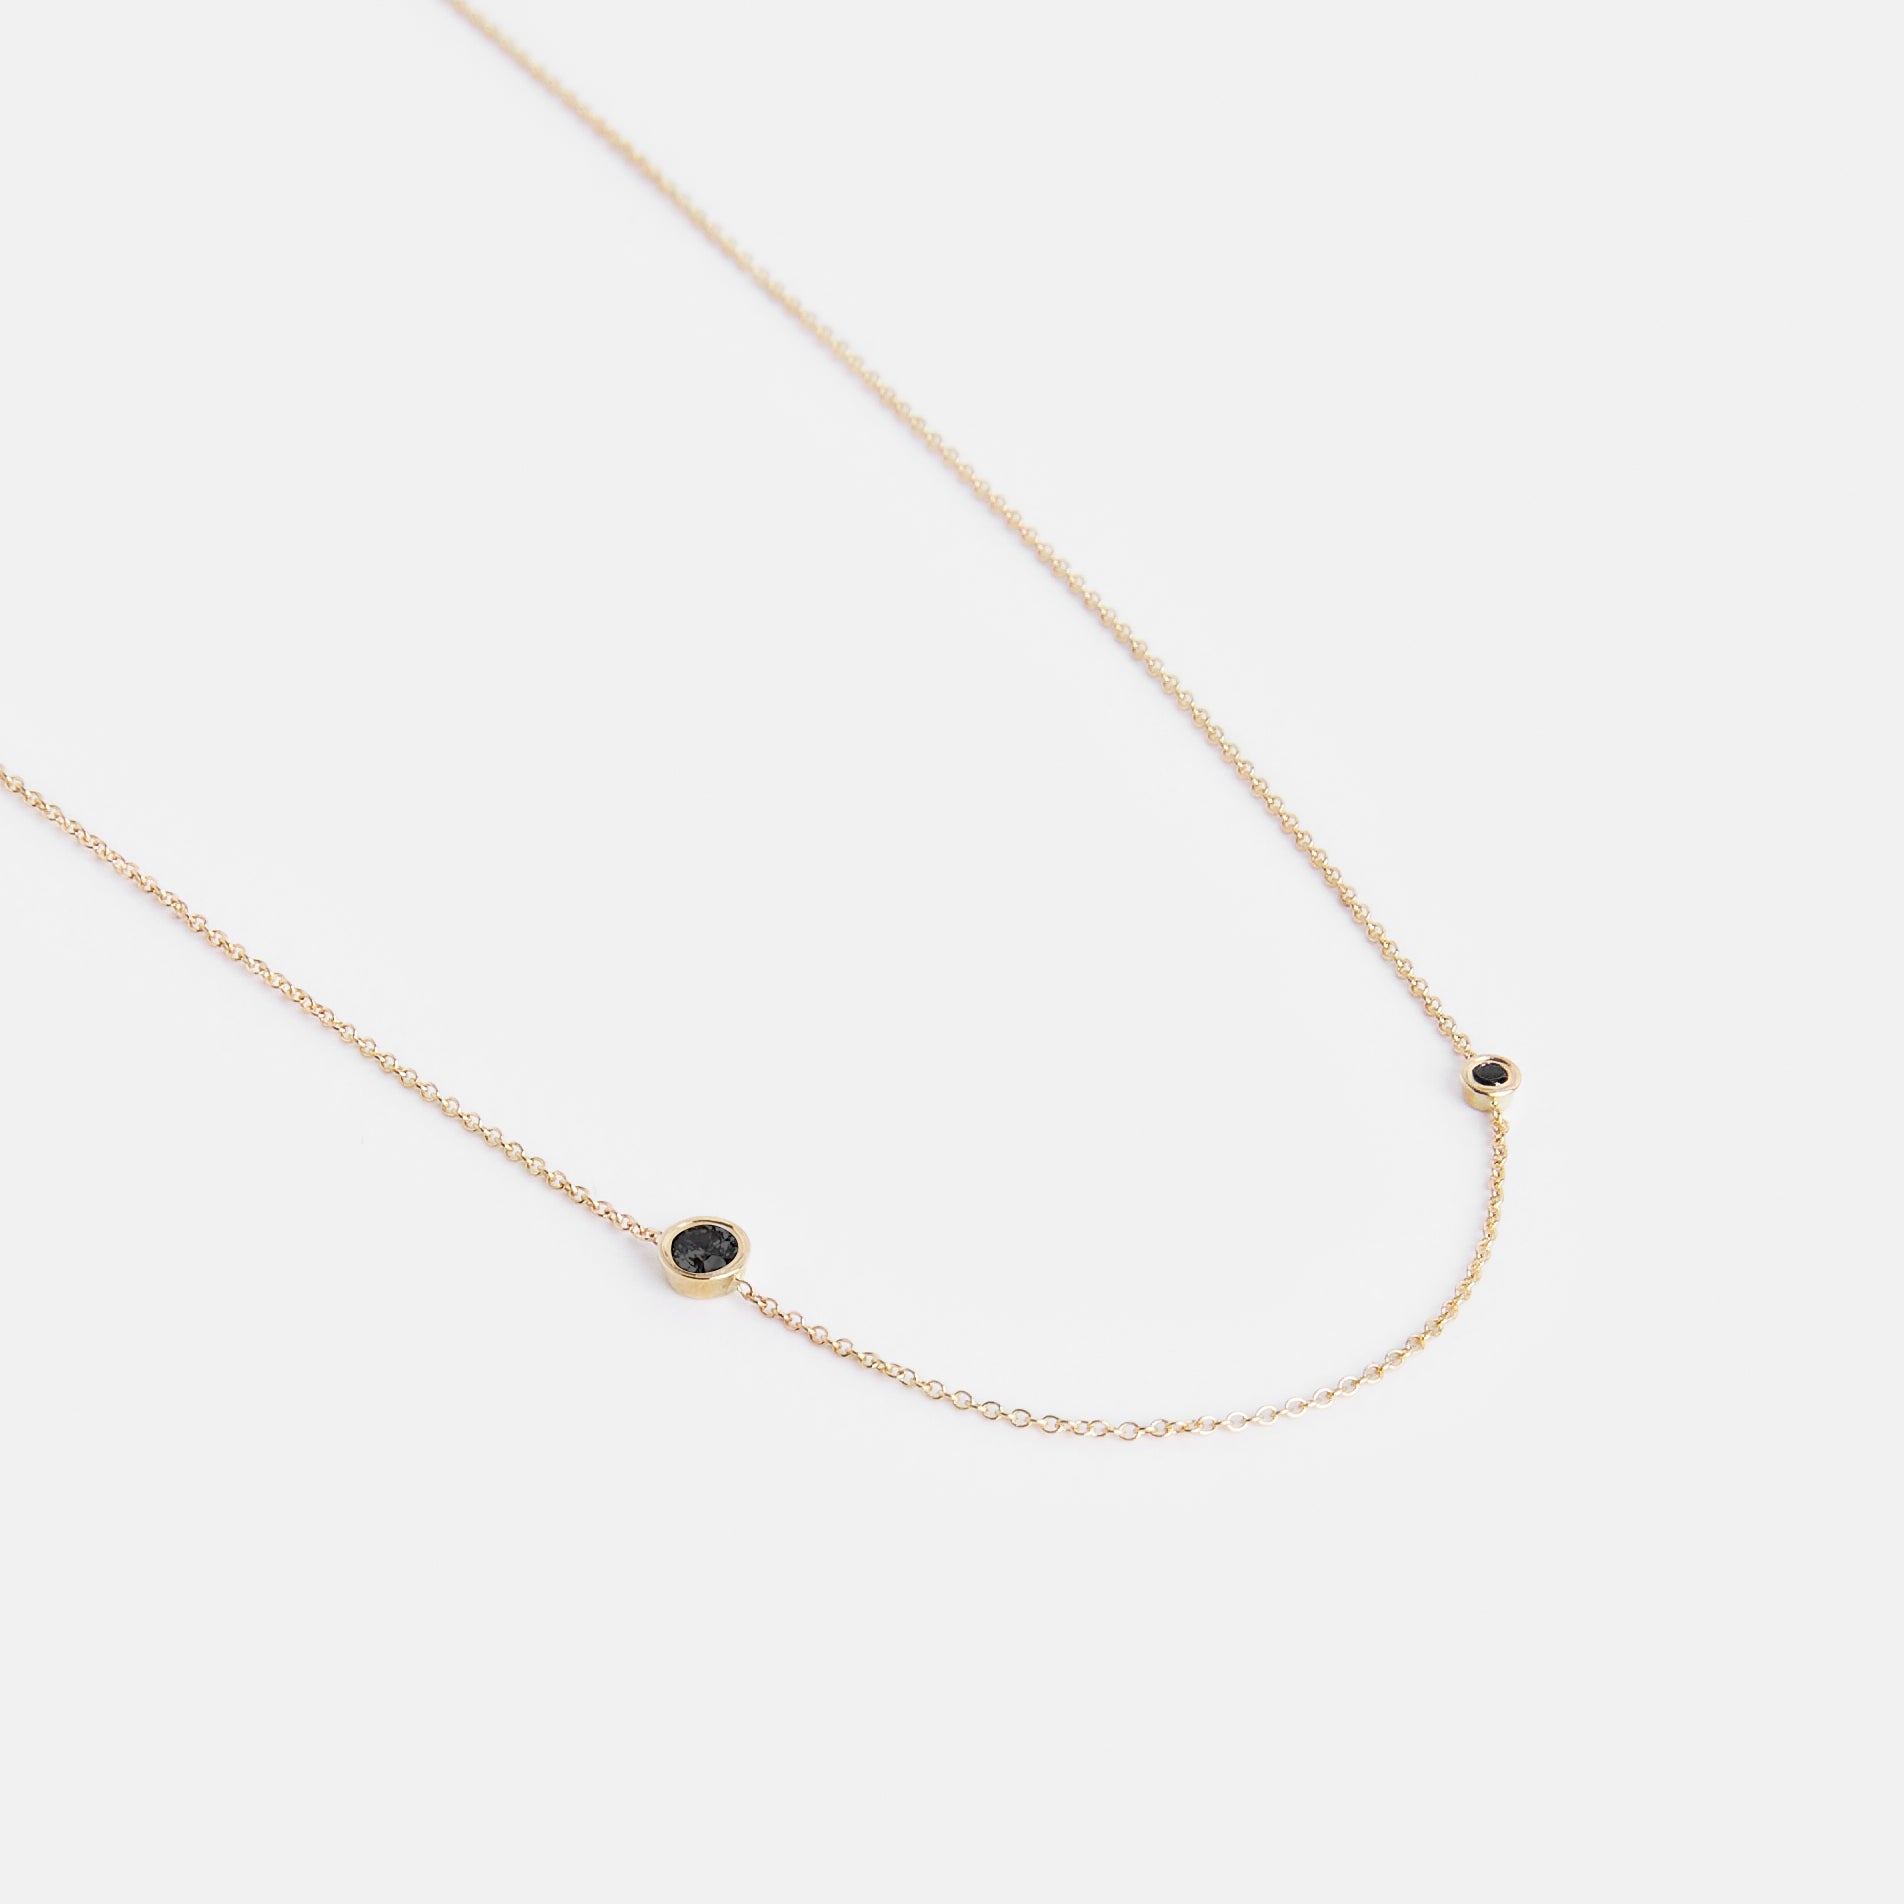 Iba Simple Necklace in 14k Gold set with Black Diamonds By SHW Fine Jewelry NYC